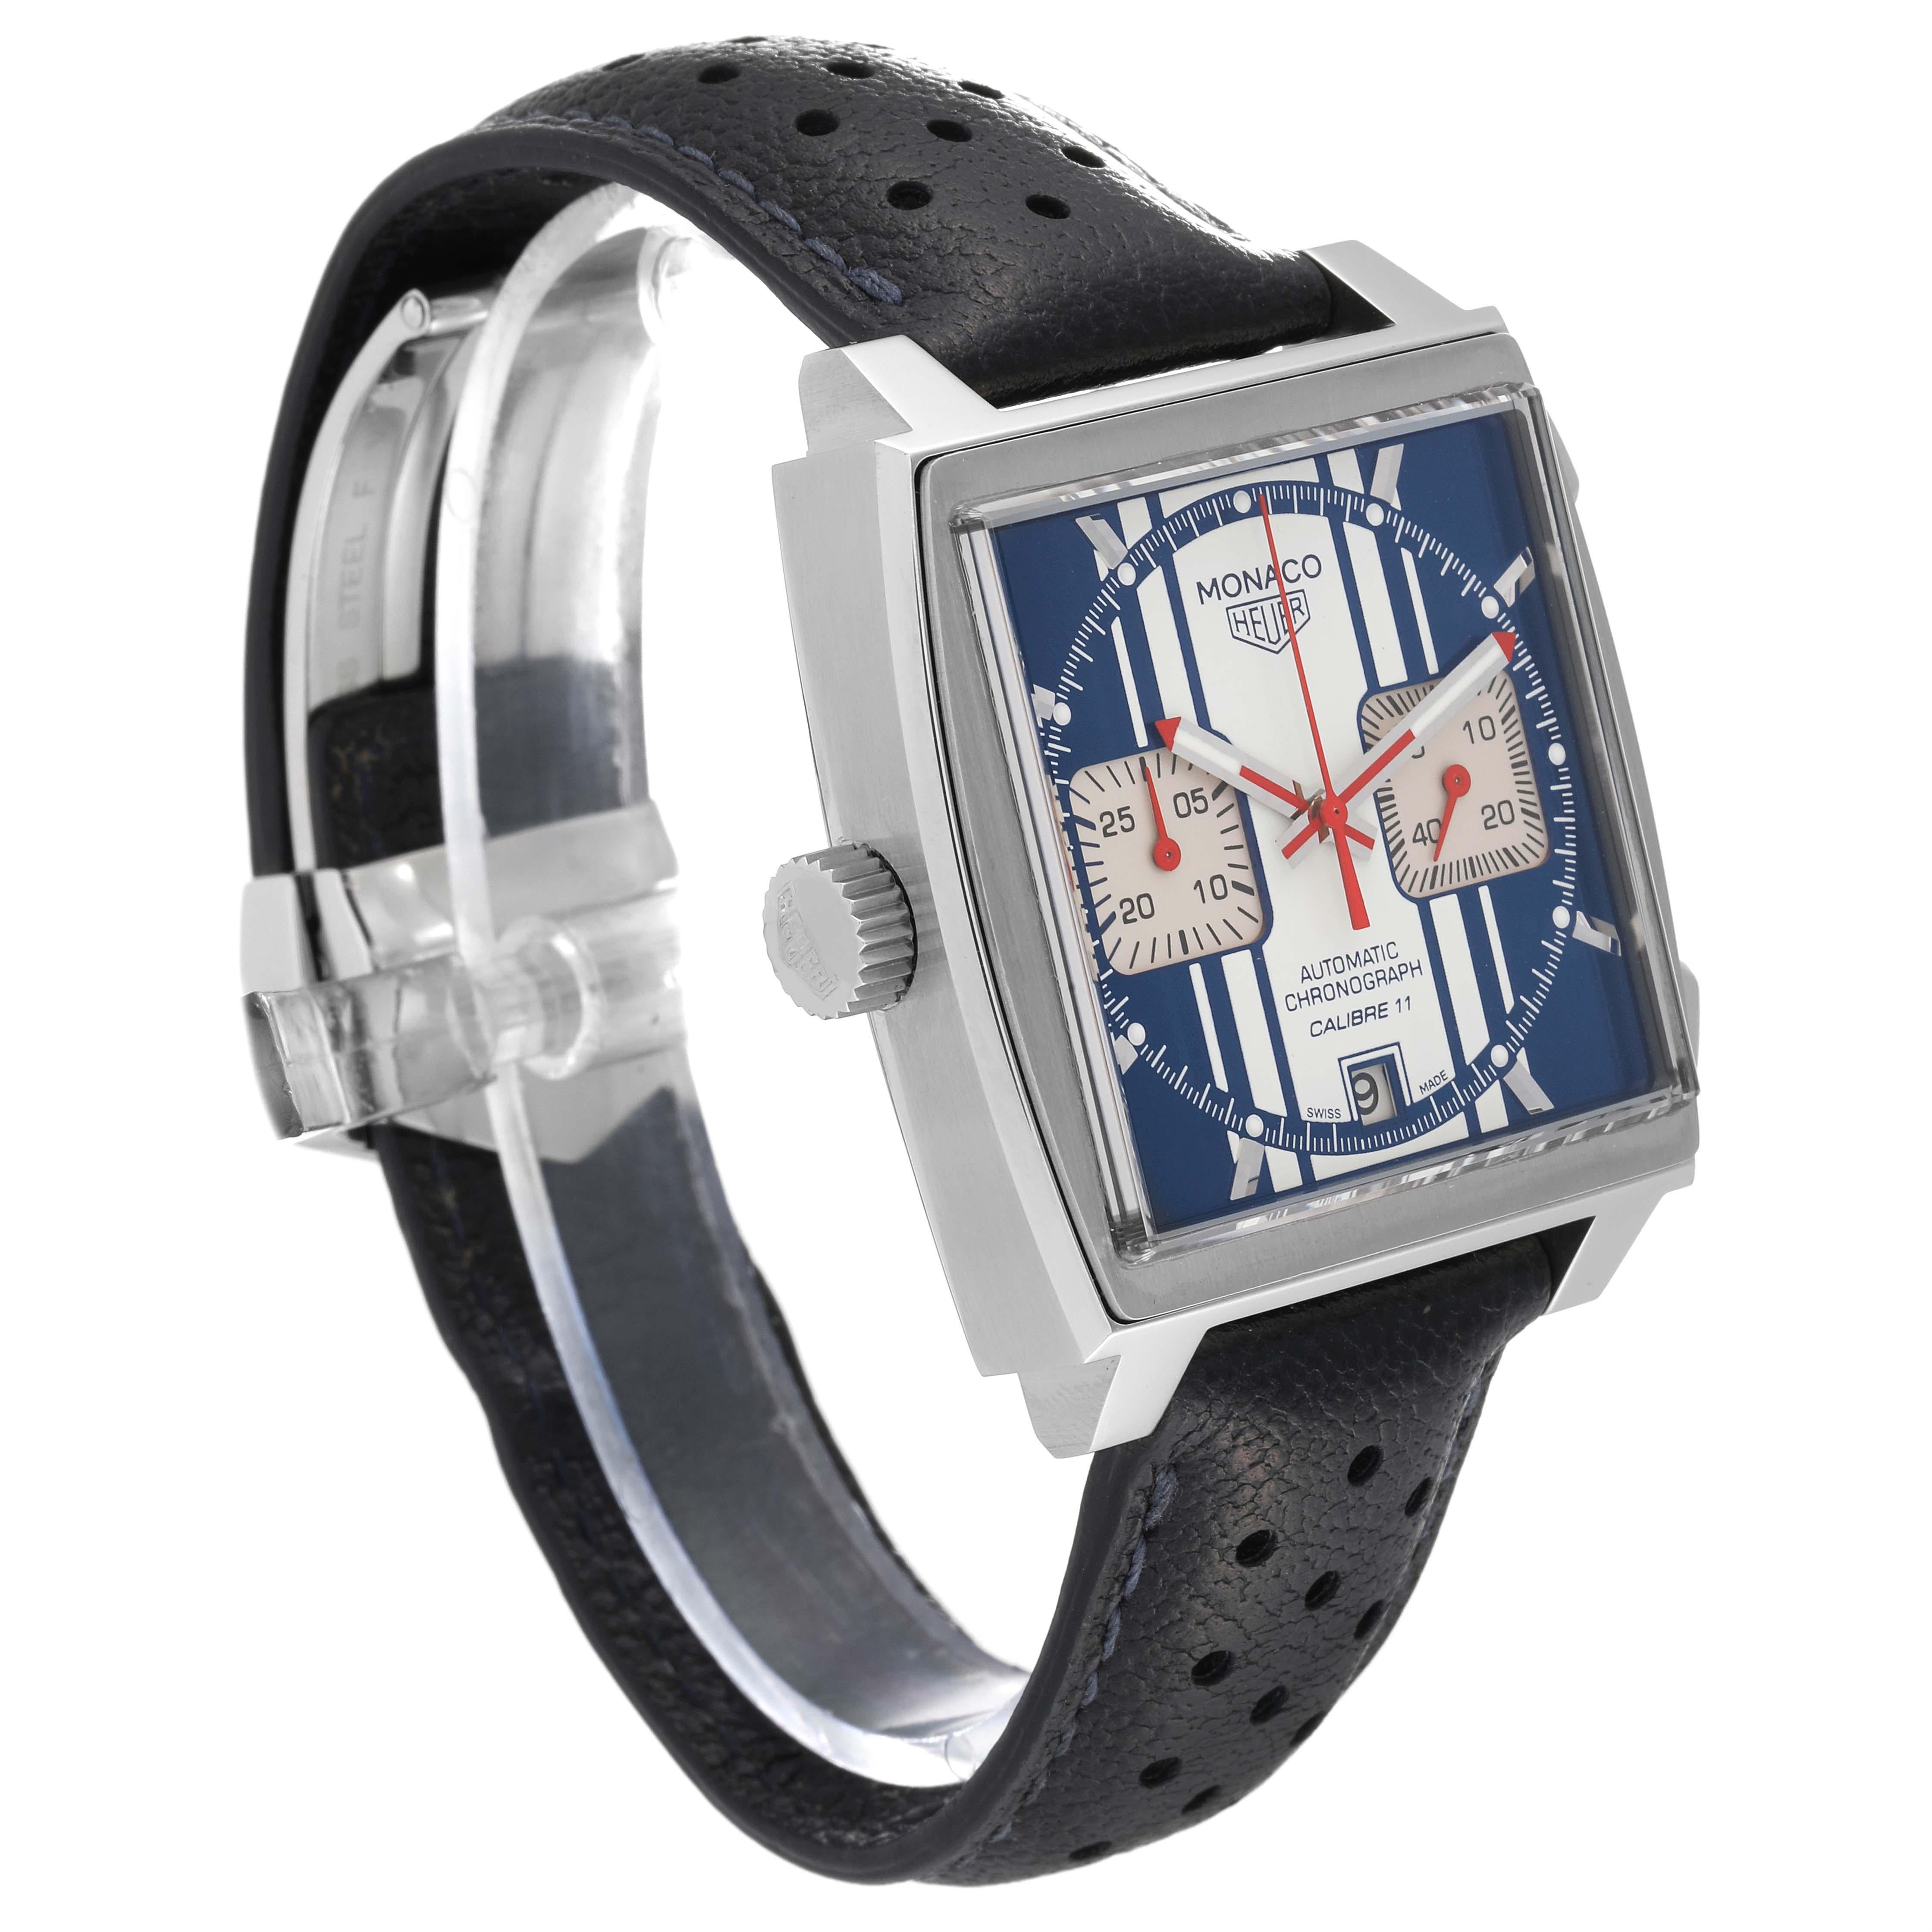 Tag Heuer Monaco McQueen Limited Edition Steel Mens Watch CAW211D Box Card. Automatic self-winding movement. Alternate fine-brushed and polished square stainless steel case 39.0 x 39.0 mm. Fluted crown. Transparent exhibition sapphire crystal